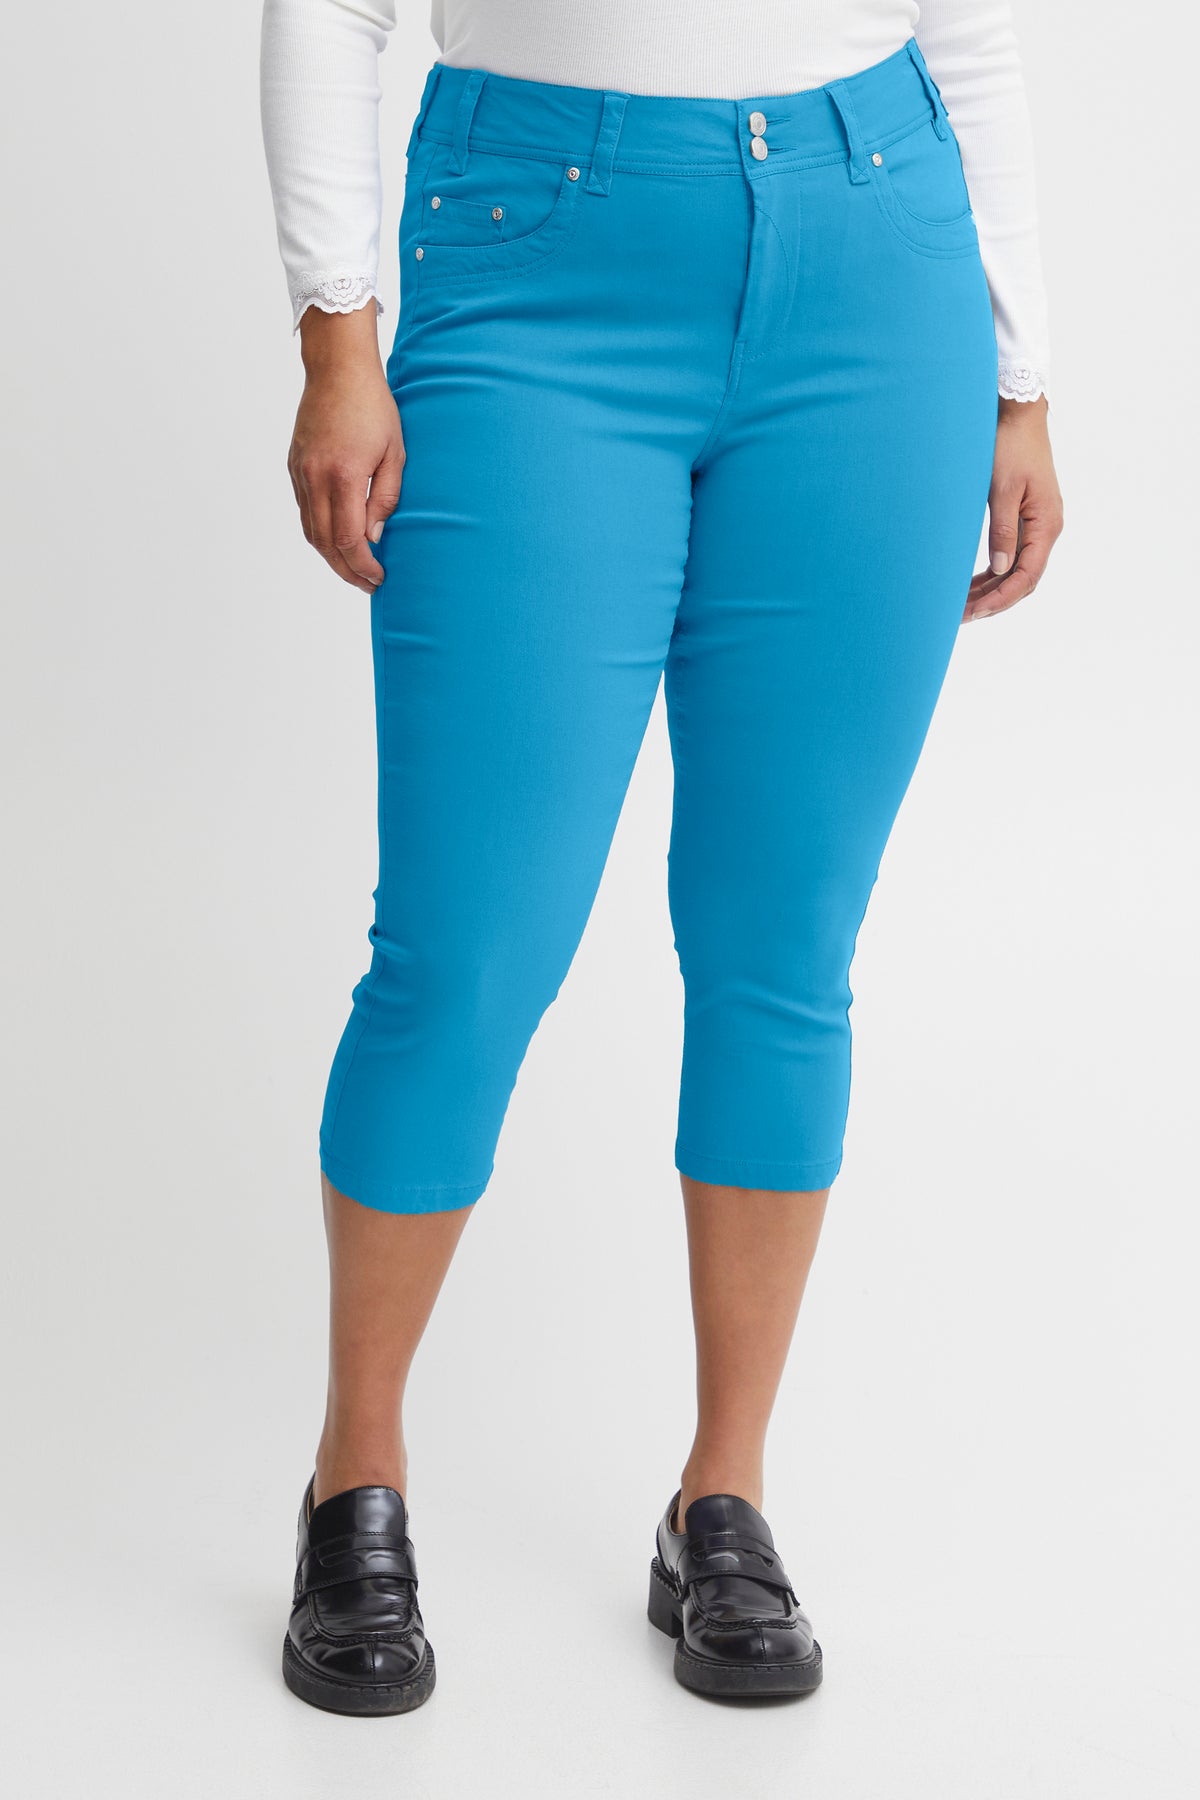 The Happy Curve Pant